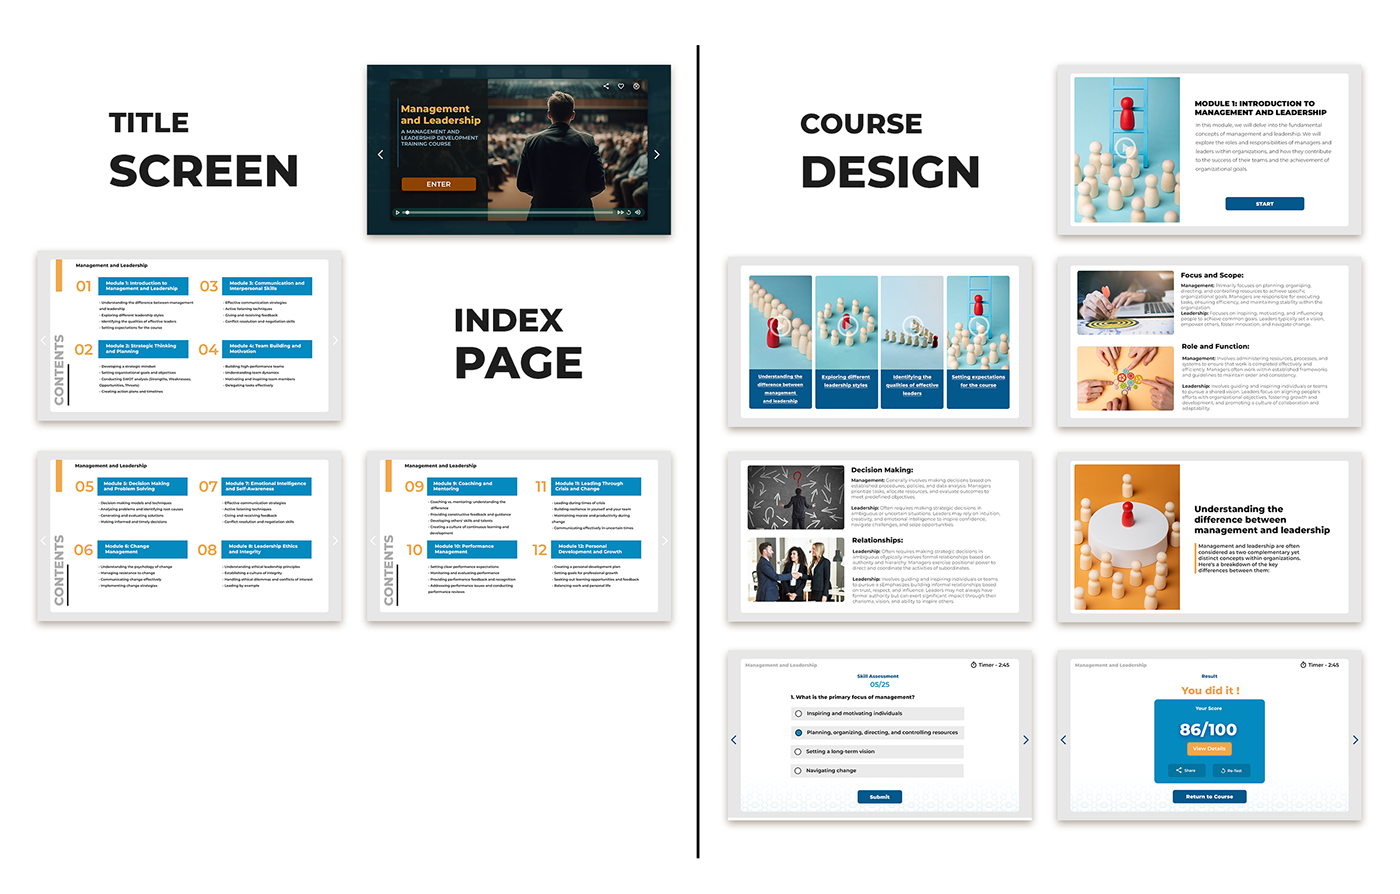 template eLearning course Education learning University Corporate Design Articulate UI/UX Storyline 360